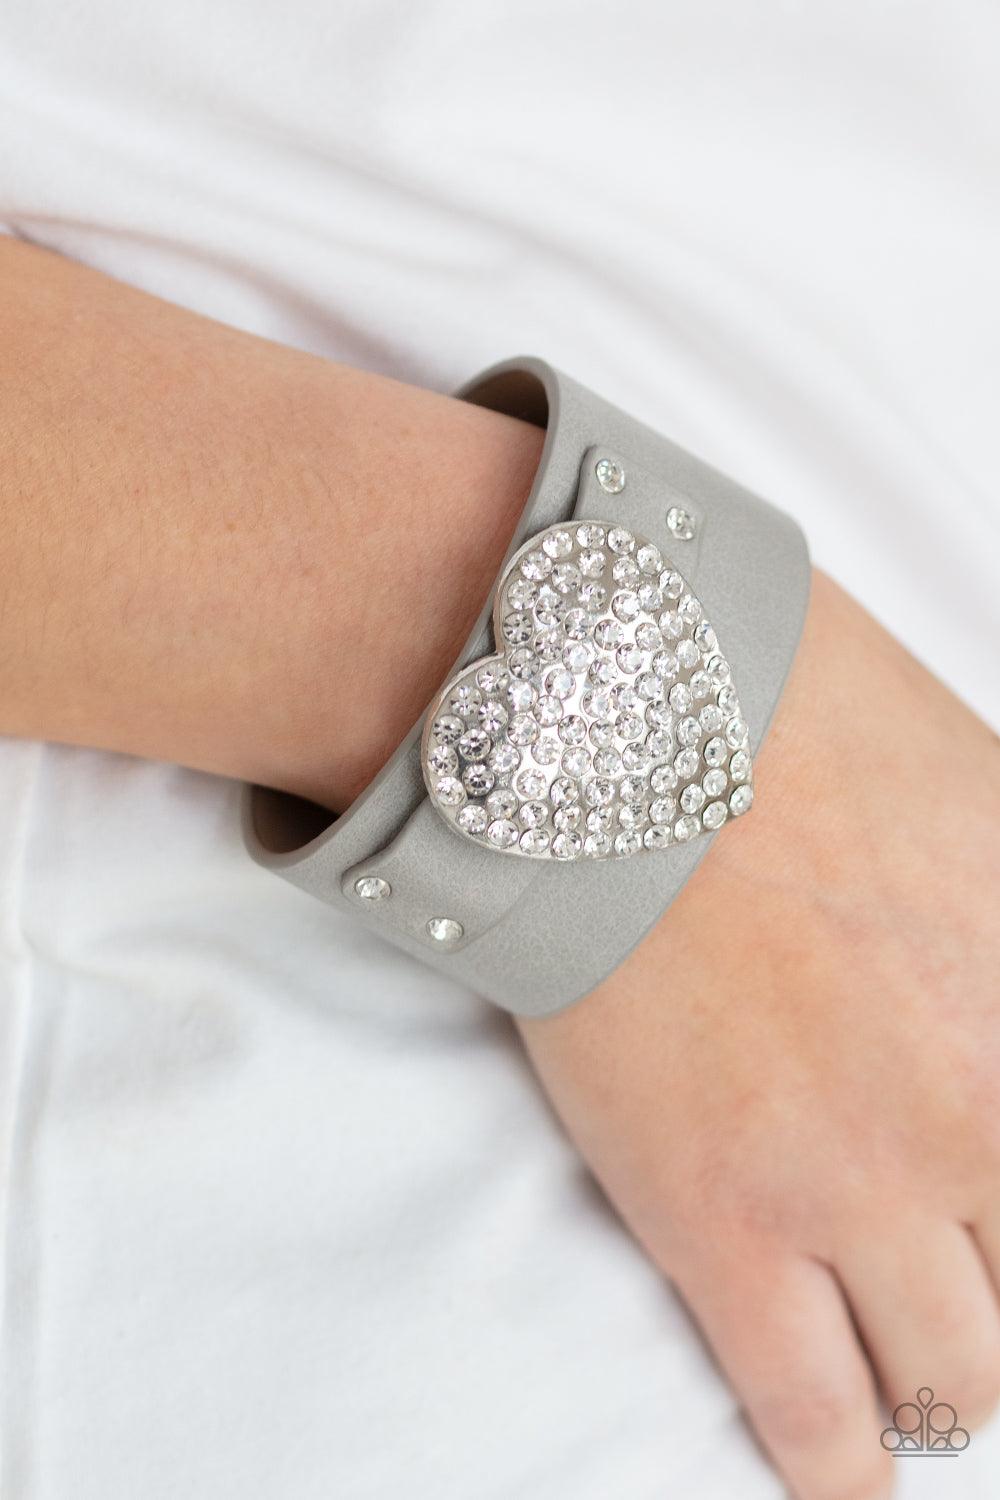 Paparazzi Accessories Flauntable Flirt - Silver Encrusted in blinding white rhinestones, an oversized silver heart frame is studded in place across the front of a gray leather band, creating a flirtatious centerpiece around the wrist. Features an adjustab